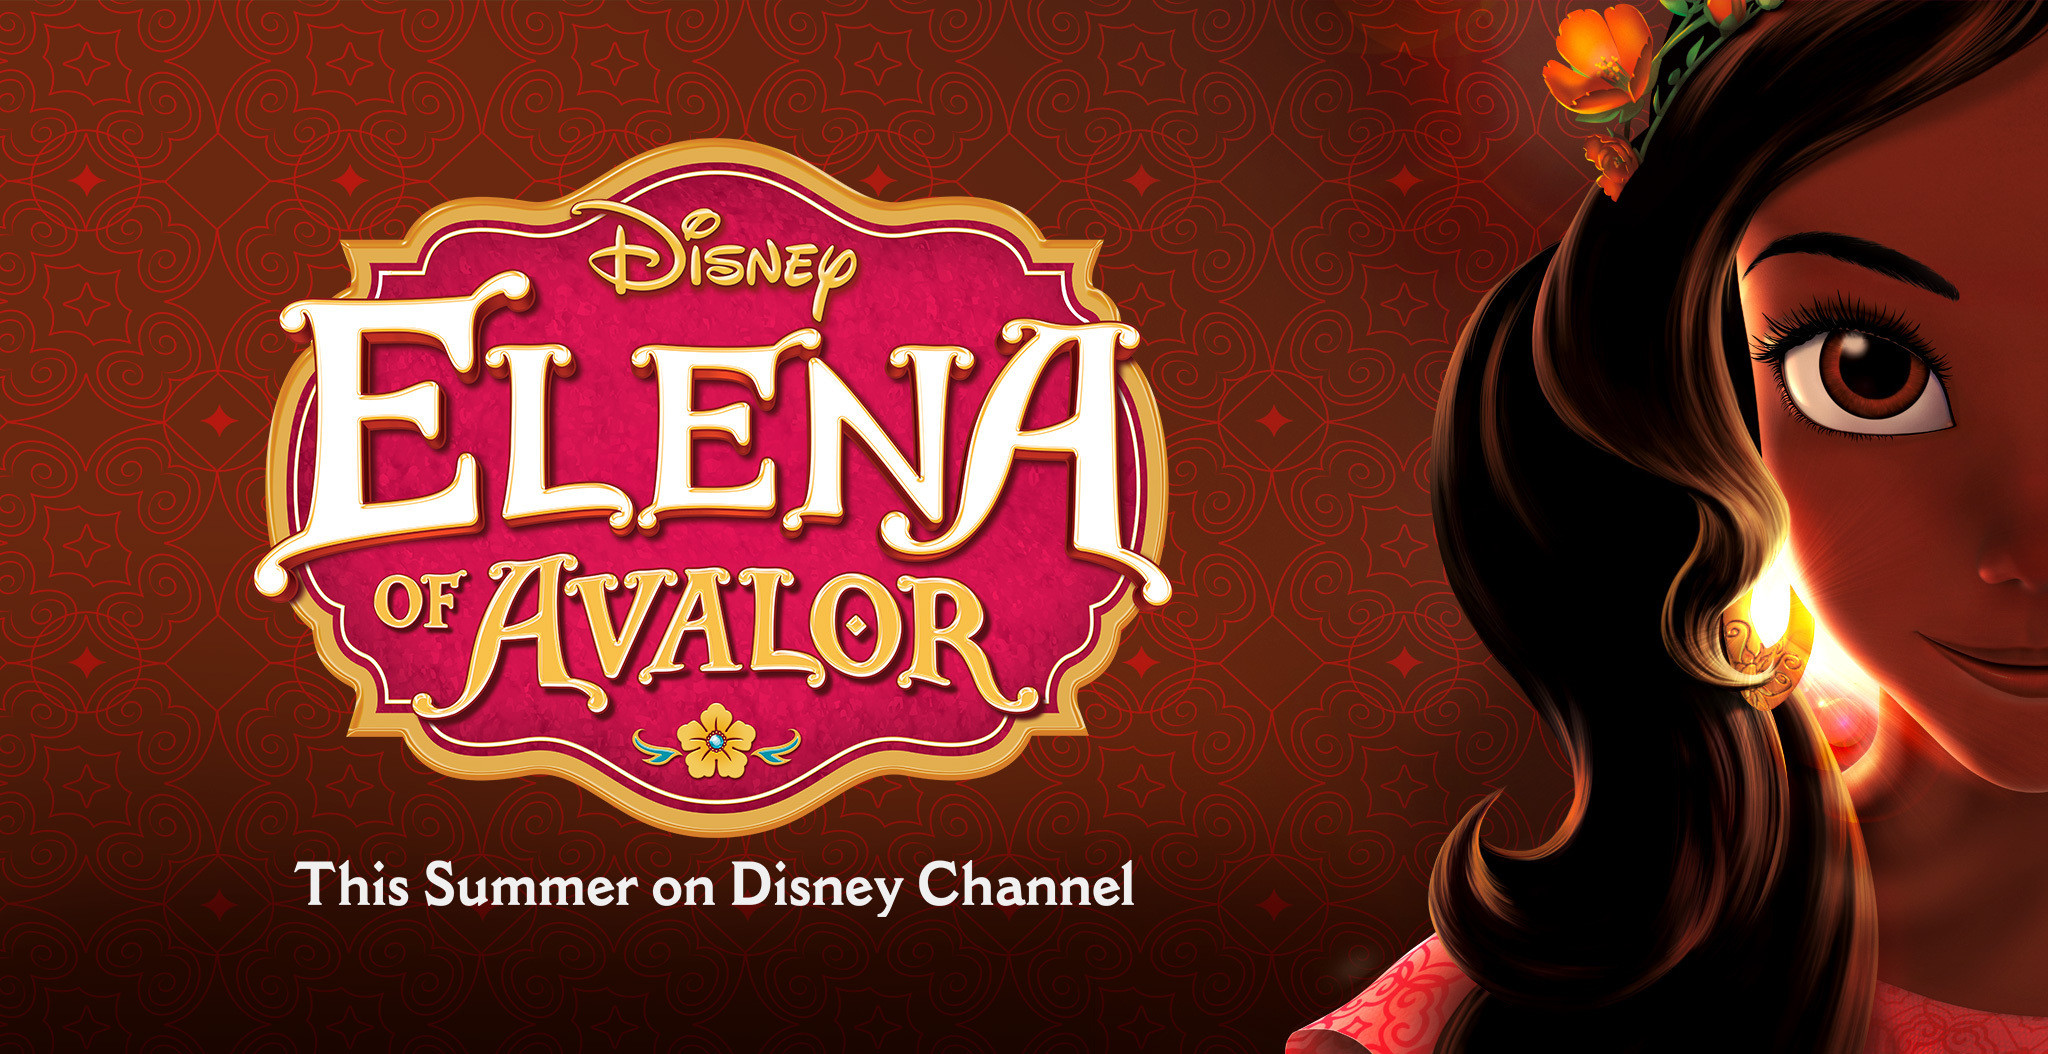 Princess Elena of Avalor’s Ballgown is Revealed Along with Meet & Greet Details